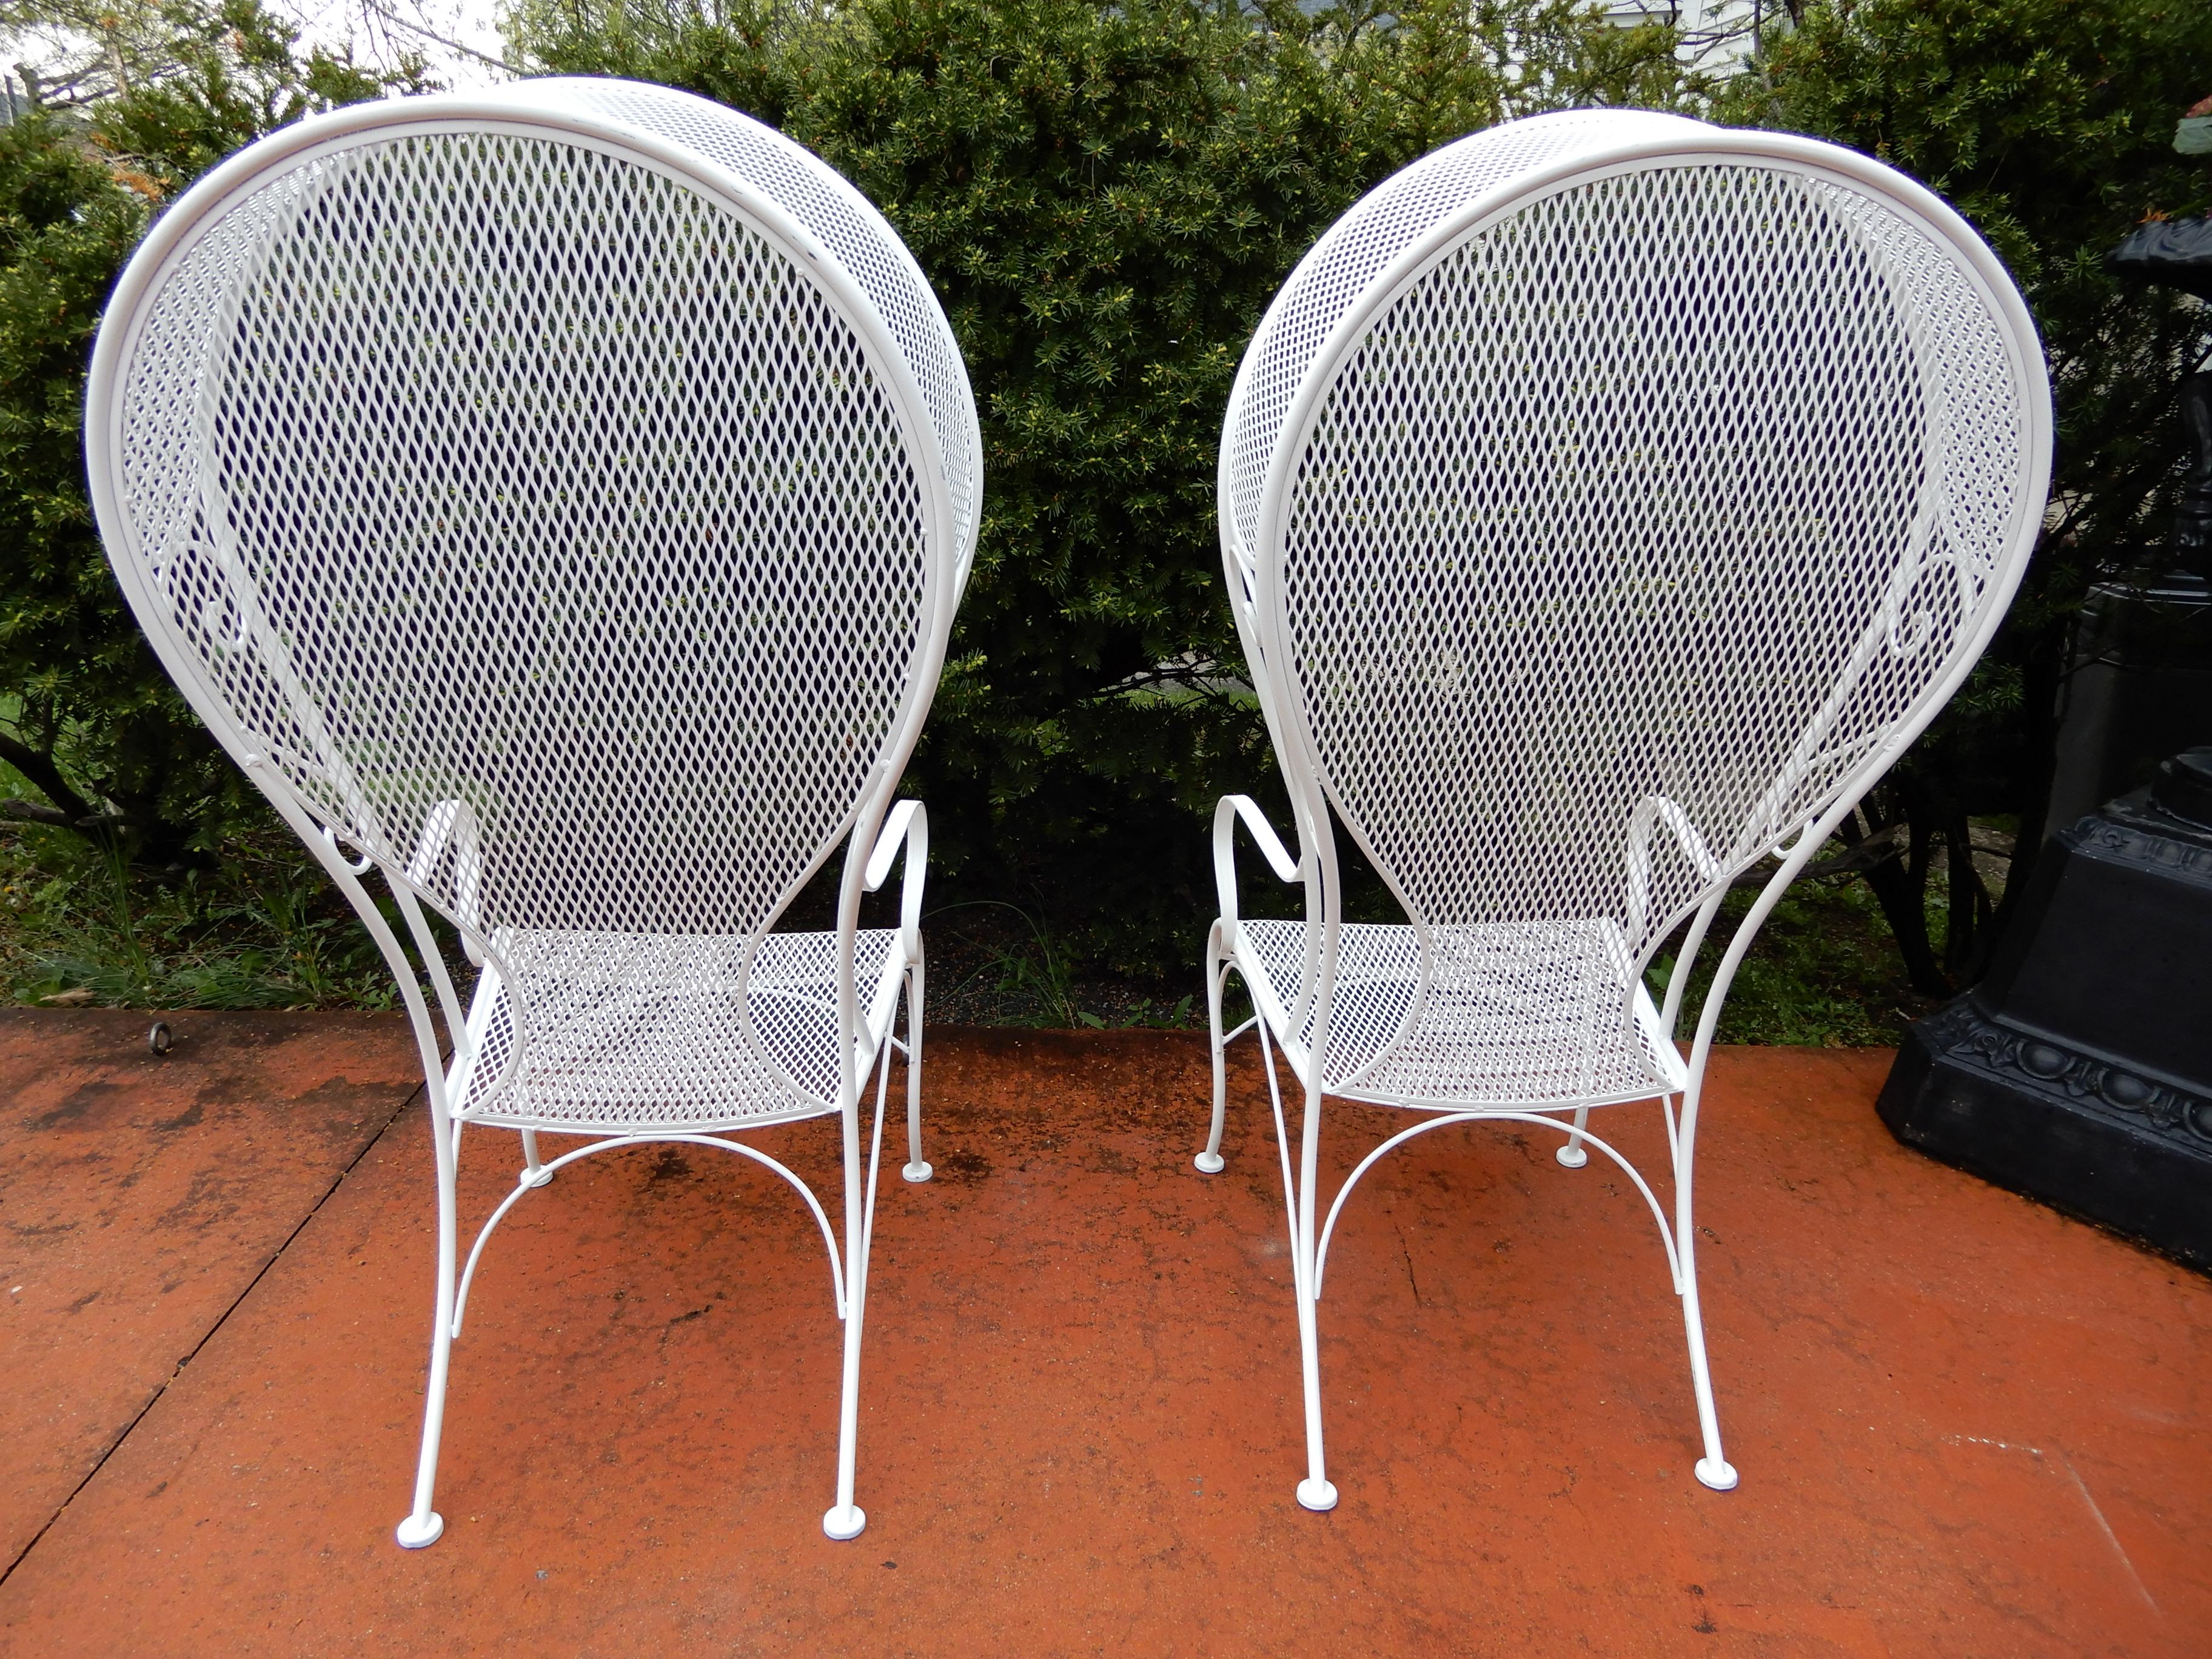 A pair of vintage Woodard hooded wrought iron chairs. The chairs have just been painted white and are in excellent condition. Other vintage Woodard Hollywood Regency wrought iron furniture is available. Let me know if I can assist with shipping